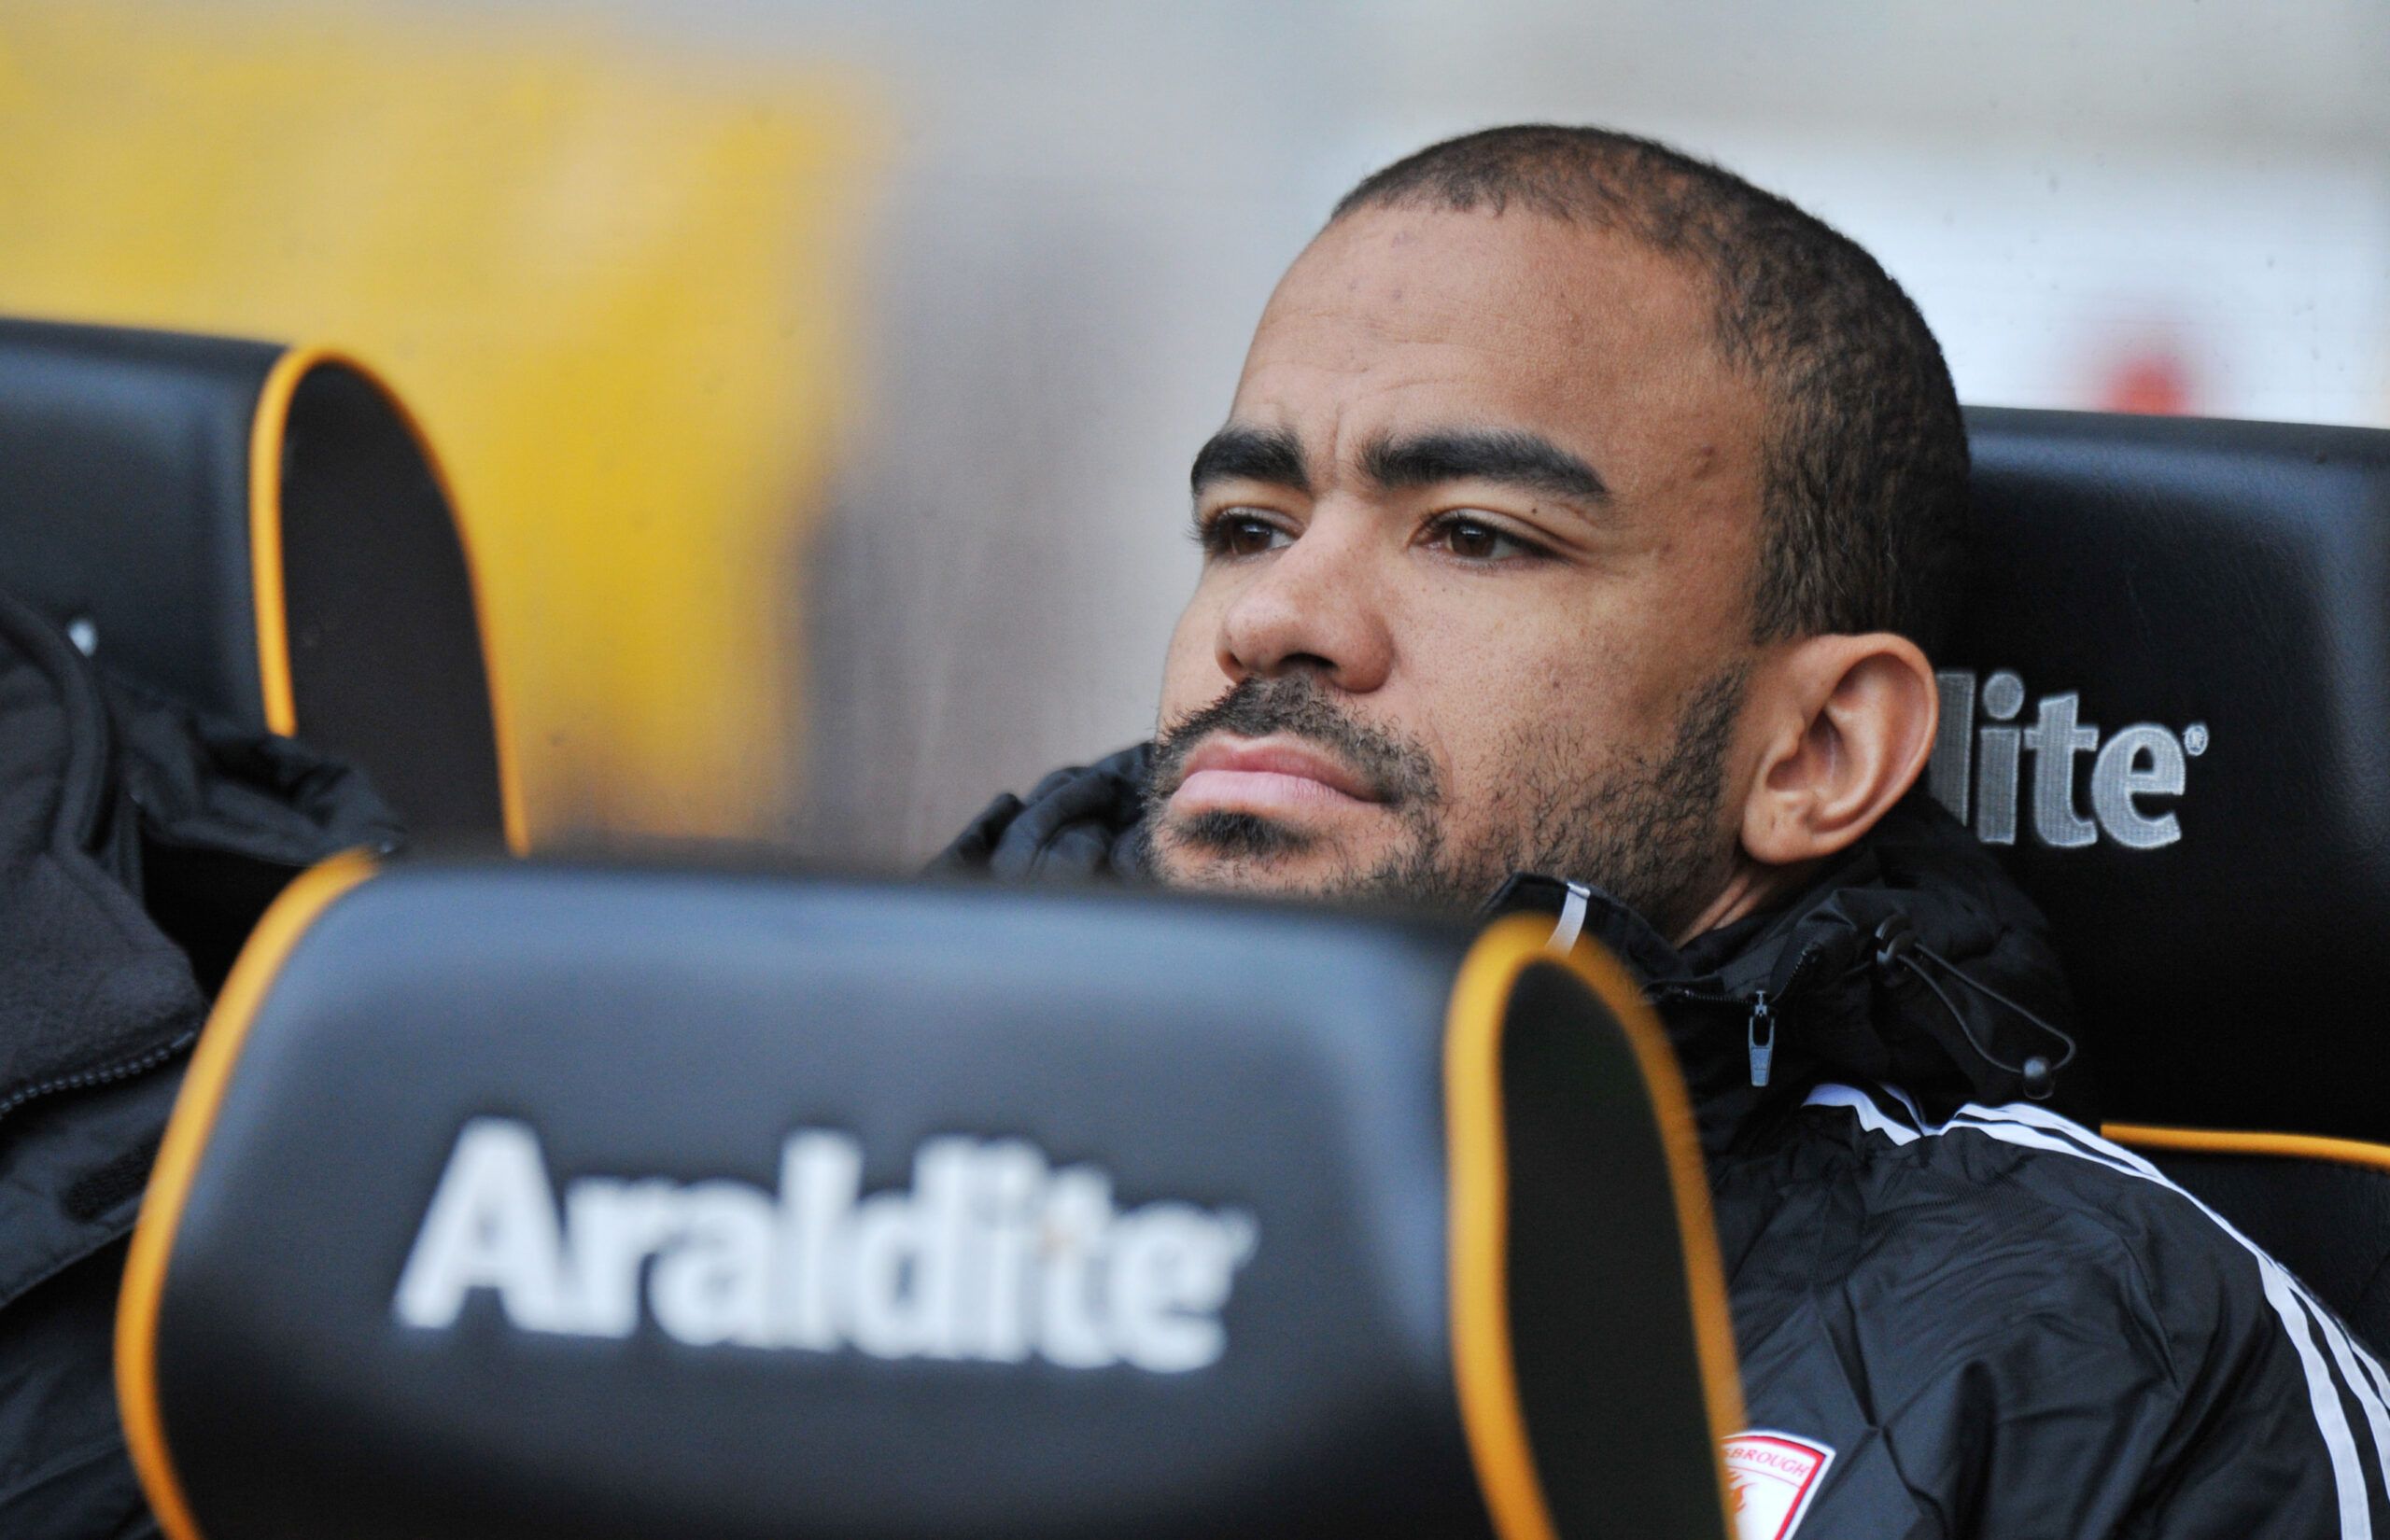 Football - Wolverhampton Wanderers v Middlesbrough - npower Football League Championship  - Molineux  -  12/13 - 30/3/13 
Middlesbrough's Kieron Dyer on the bench 
Mandatory Credit: Action Images / Adam Holt 
EDITORIAL USE ONLY. No use with unauthorized audio, video, data, fixture lists, club/league logos or live services. Online in-match use limited to 45 images, no video emulation. No use in betting, games or single club/league/player publications.  Please contact your account representative f